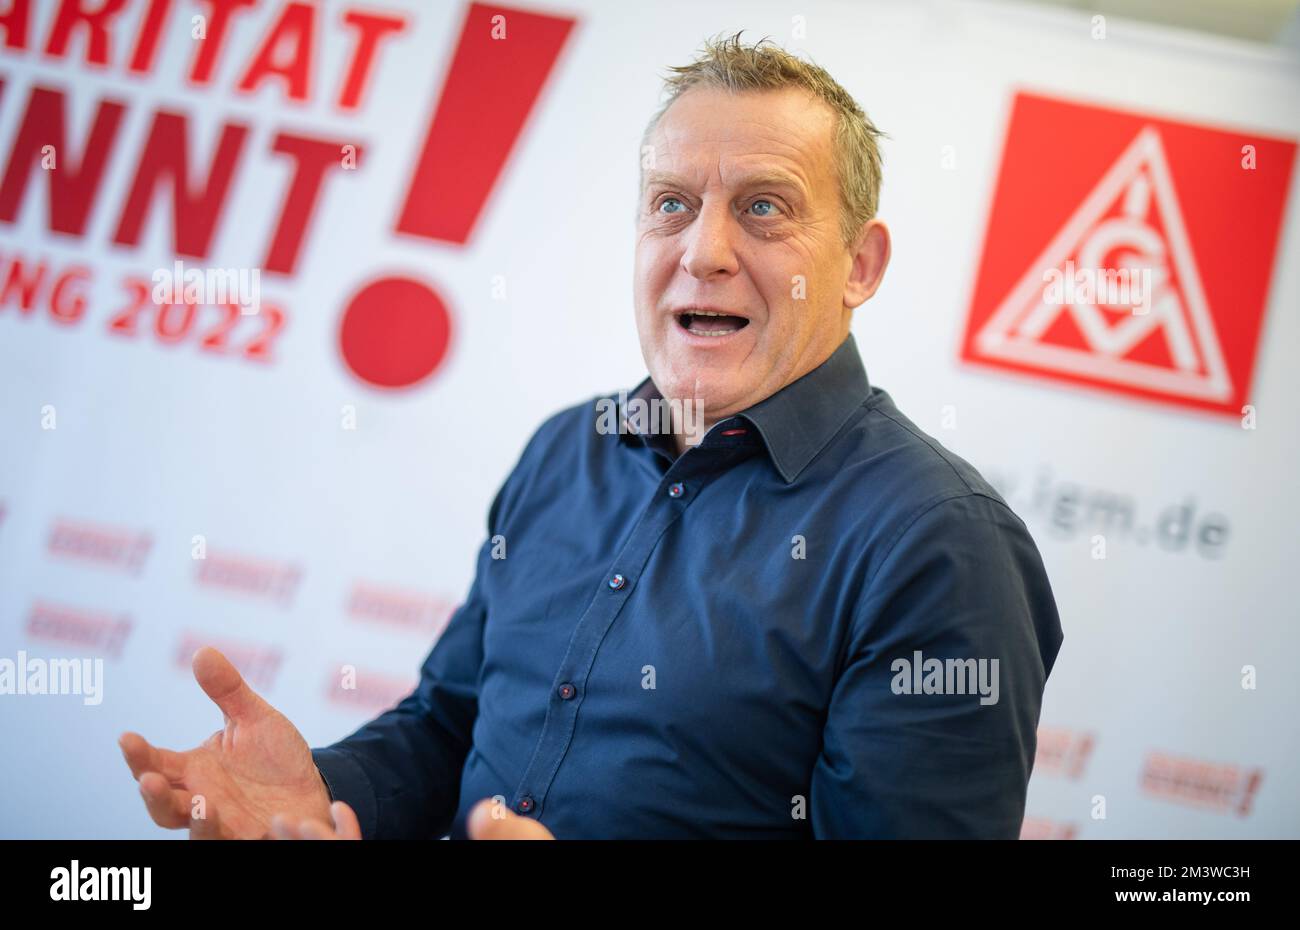 Stuttgart, Germany. 13th Dec, 2022. Roman Zitzelsberger, district leader of IG Metall Baden-Württemberg, in an interview with dpa. In the debate about longer working hours until retirement, Zitzelsberger, who is being considered as the successor to IG Metall national leader Hofmann, accused politicians of a lack of ideas. He said there were only appealing or alarmist statements. Credit: Christoph Schmidt/dpa/Alamy Live News Stock Photo